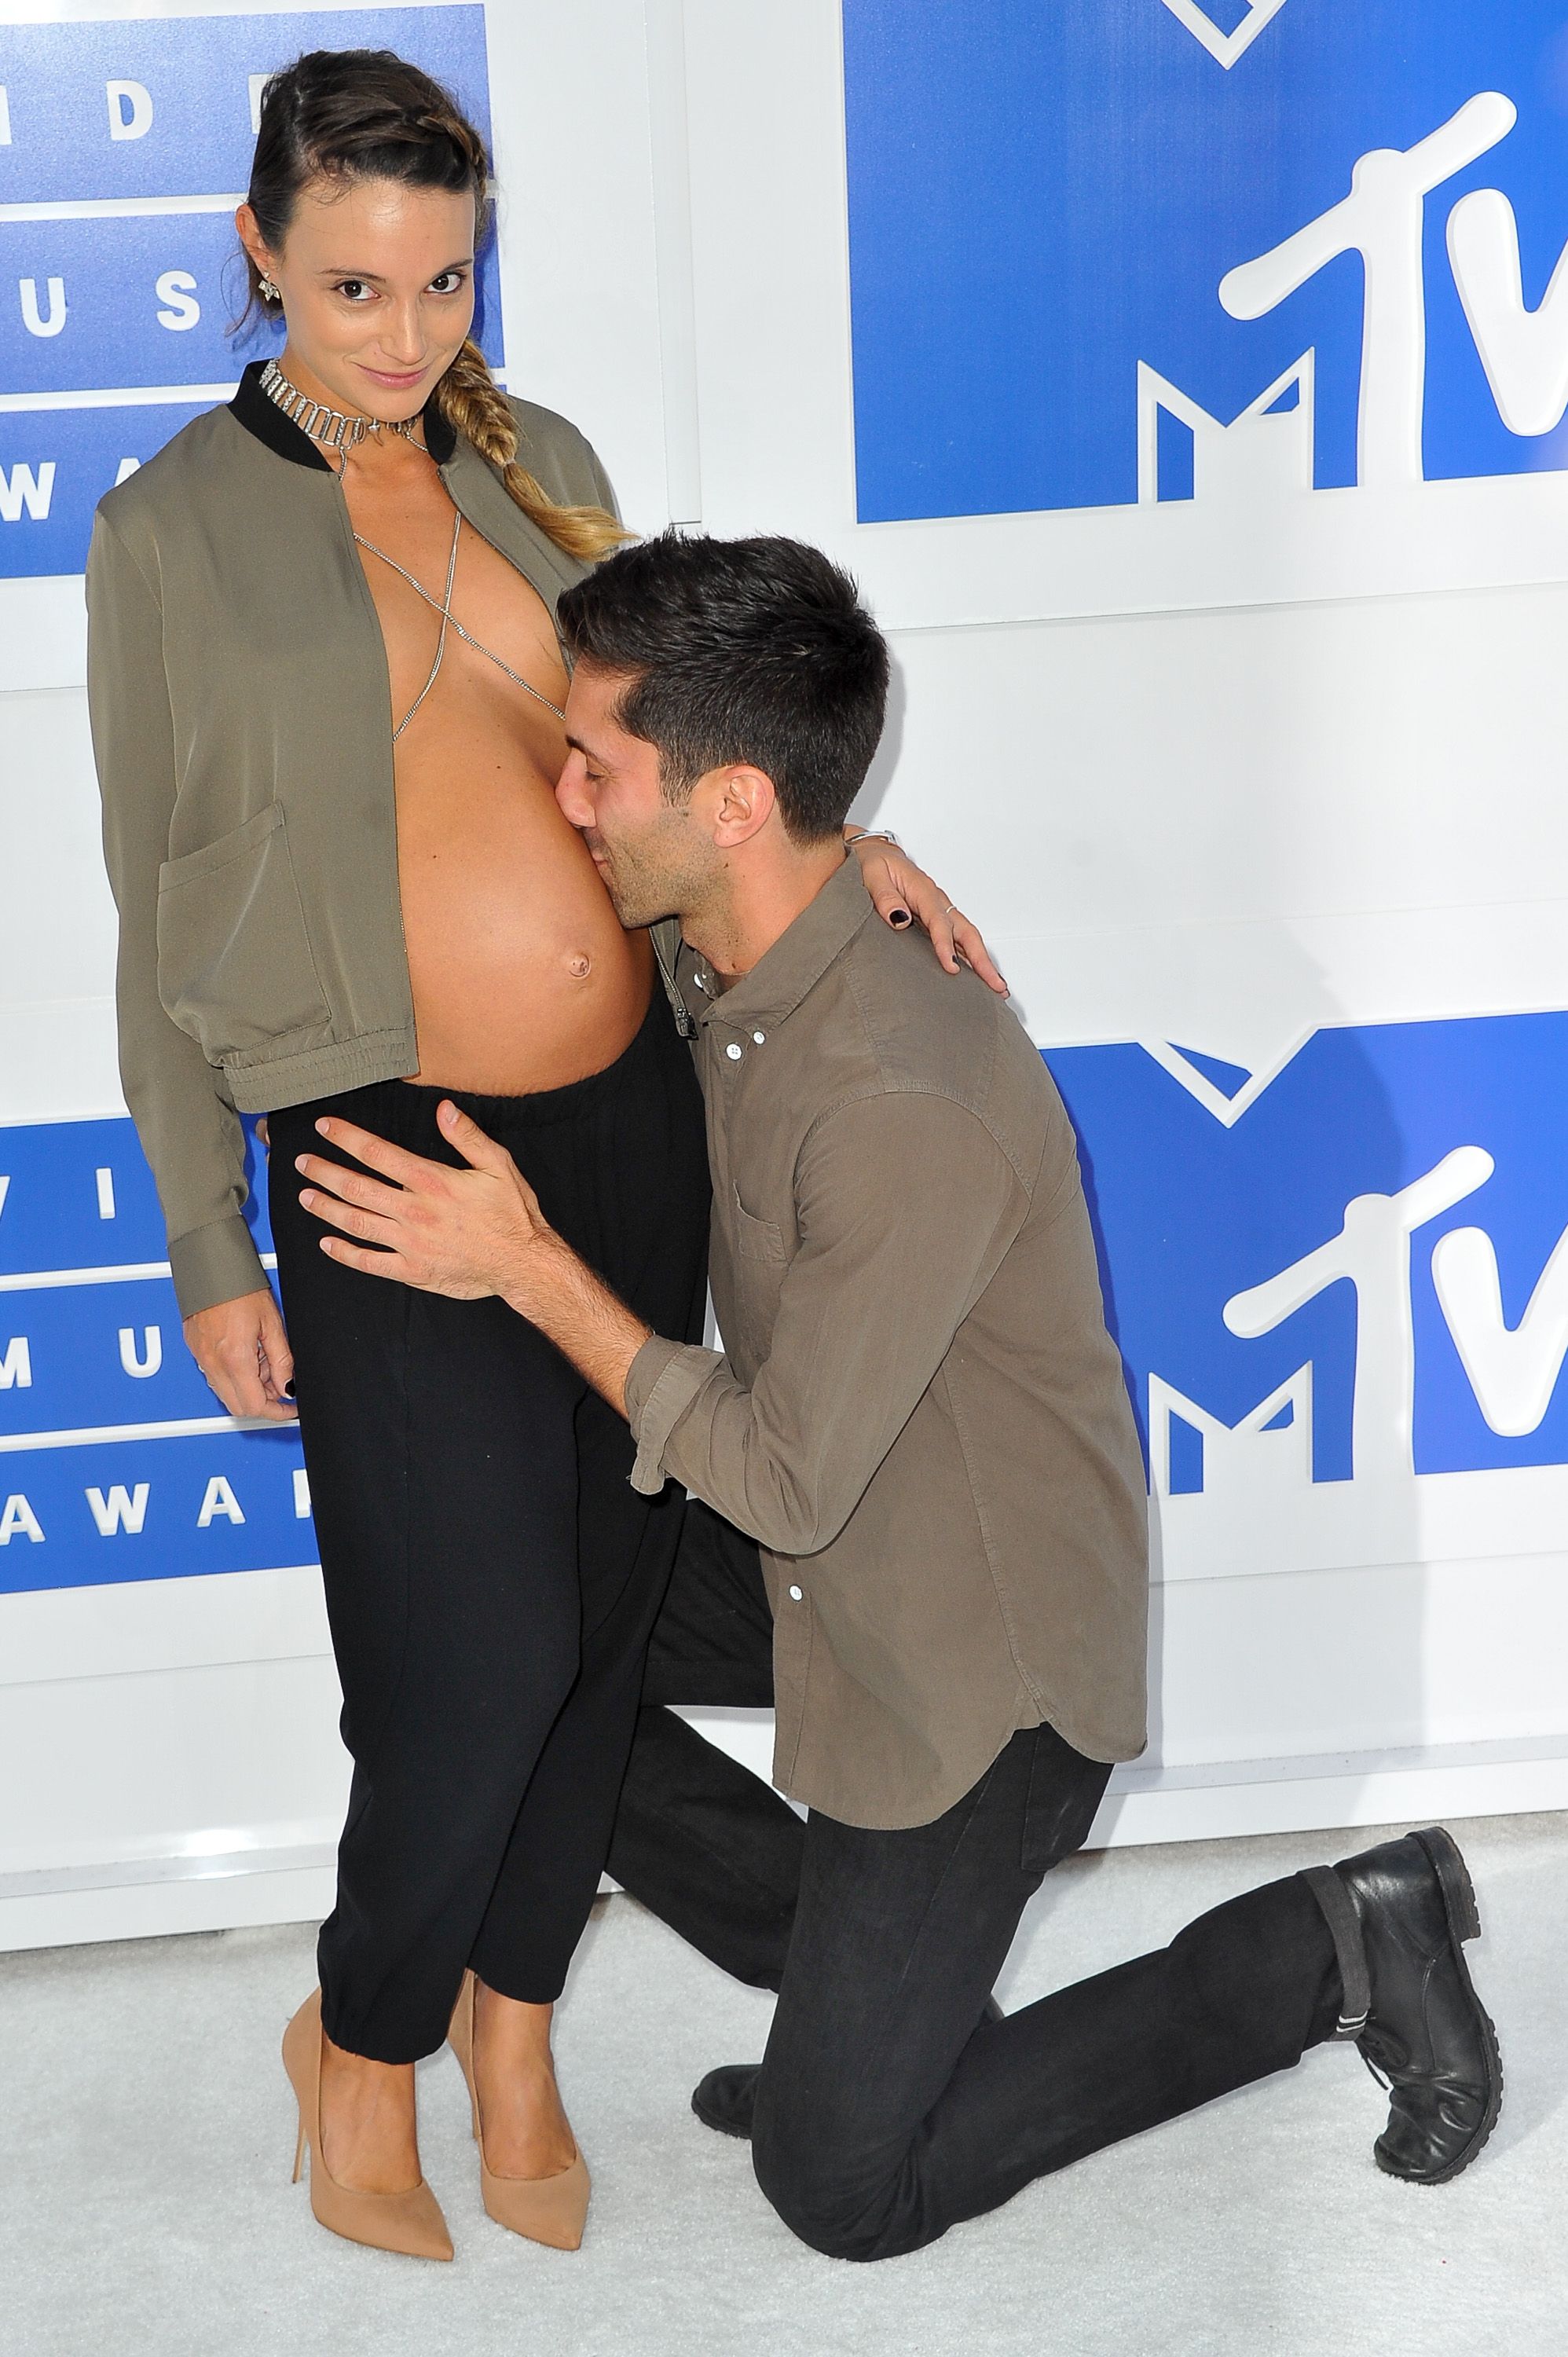 That Naked Baby Bump From the VMAs Is Now a Tropical Island image